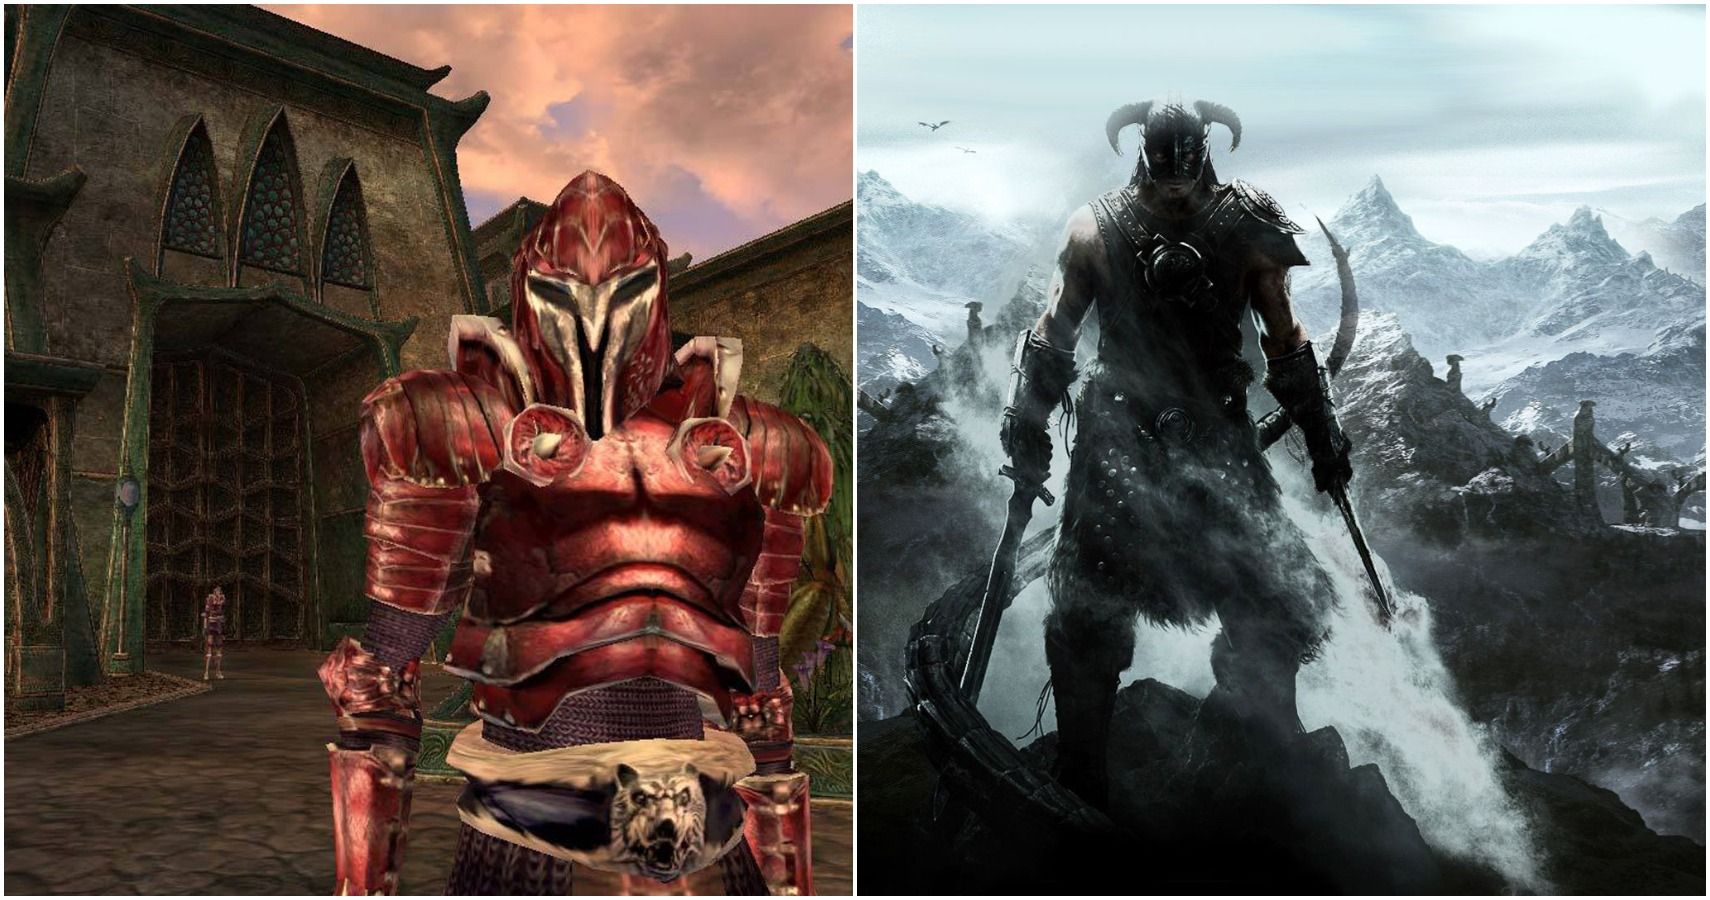 Every Elder Scrolls Game Ranked From Worst To Best (According To Metacritic)